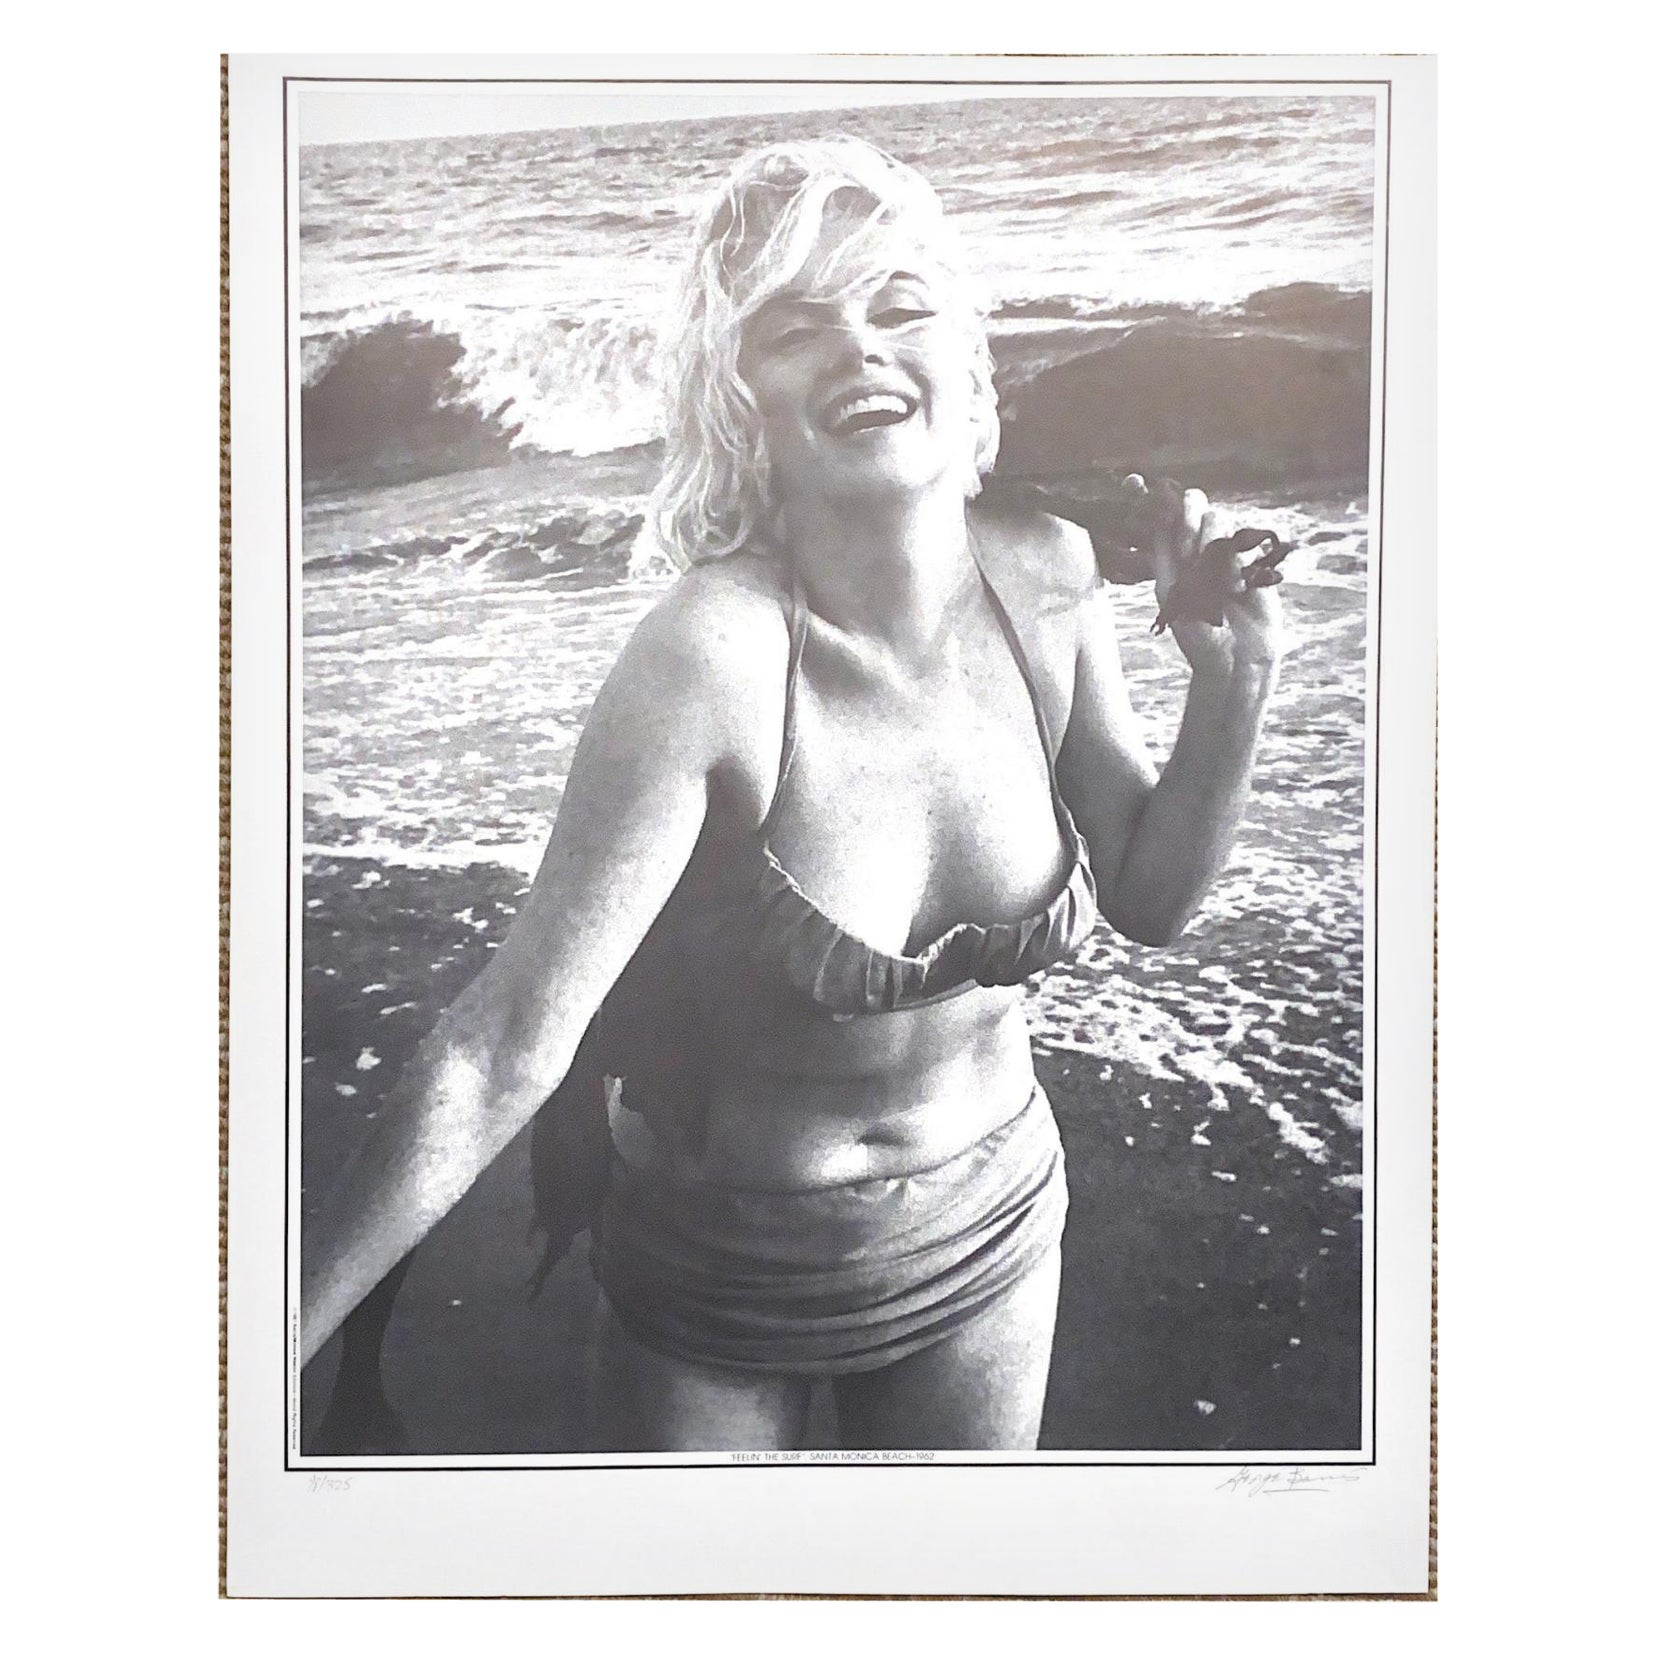 Photograph of Marilyn Monroe by G